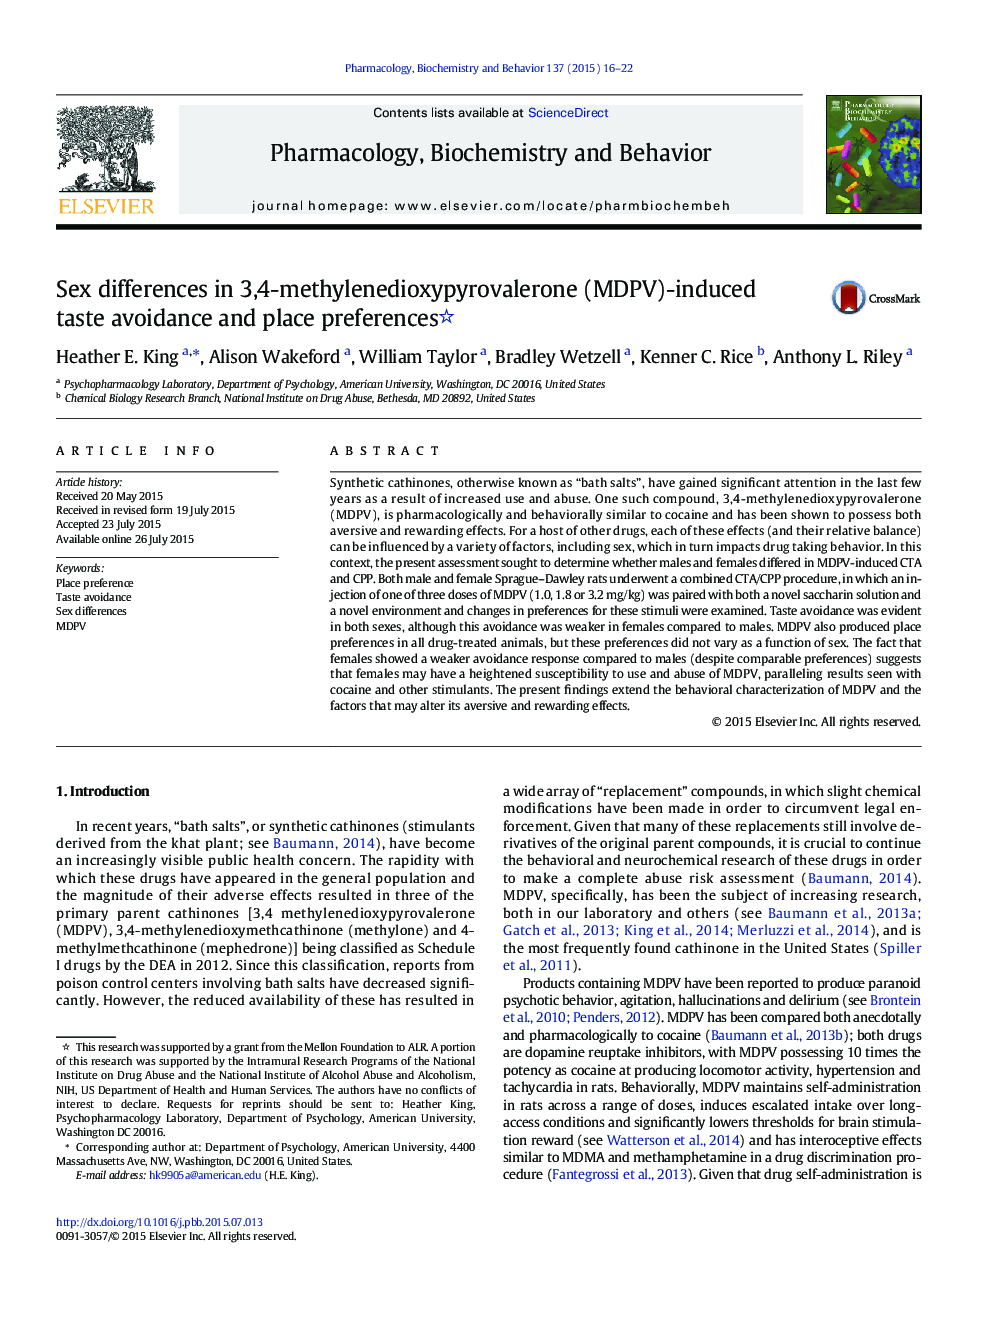 Sex differences in 3,4-methylenedioxypyrovalerone (MDPV)-induced taste avoidance and place preferences 